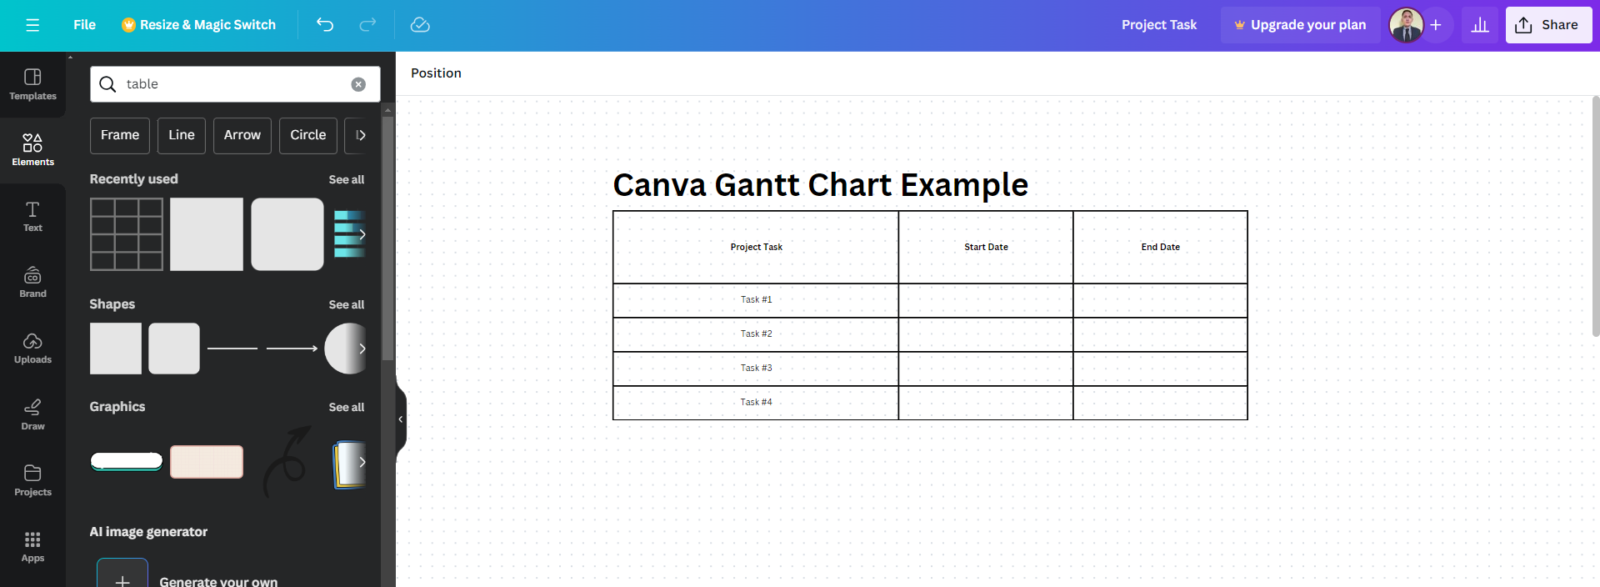 Inserting a table to make a Gantt chart task list in Canva